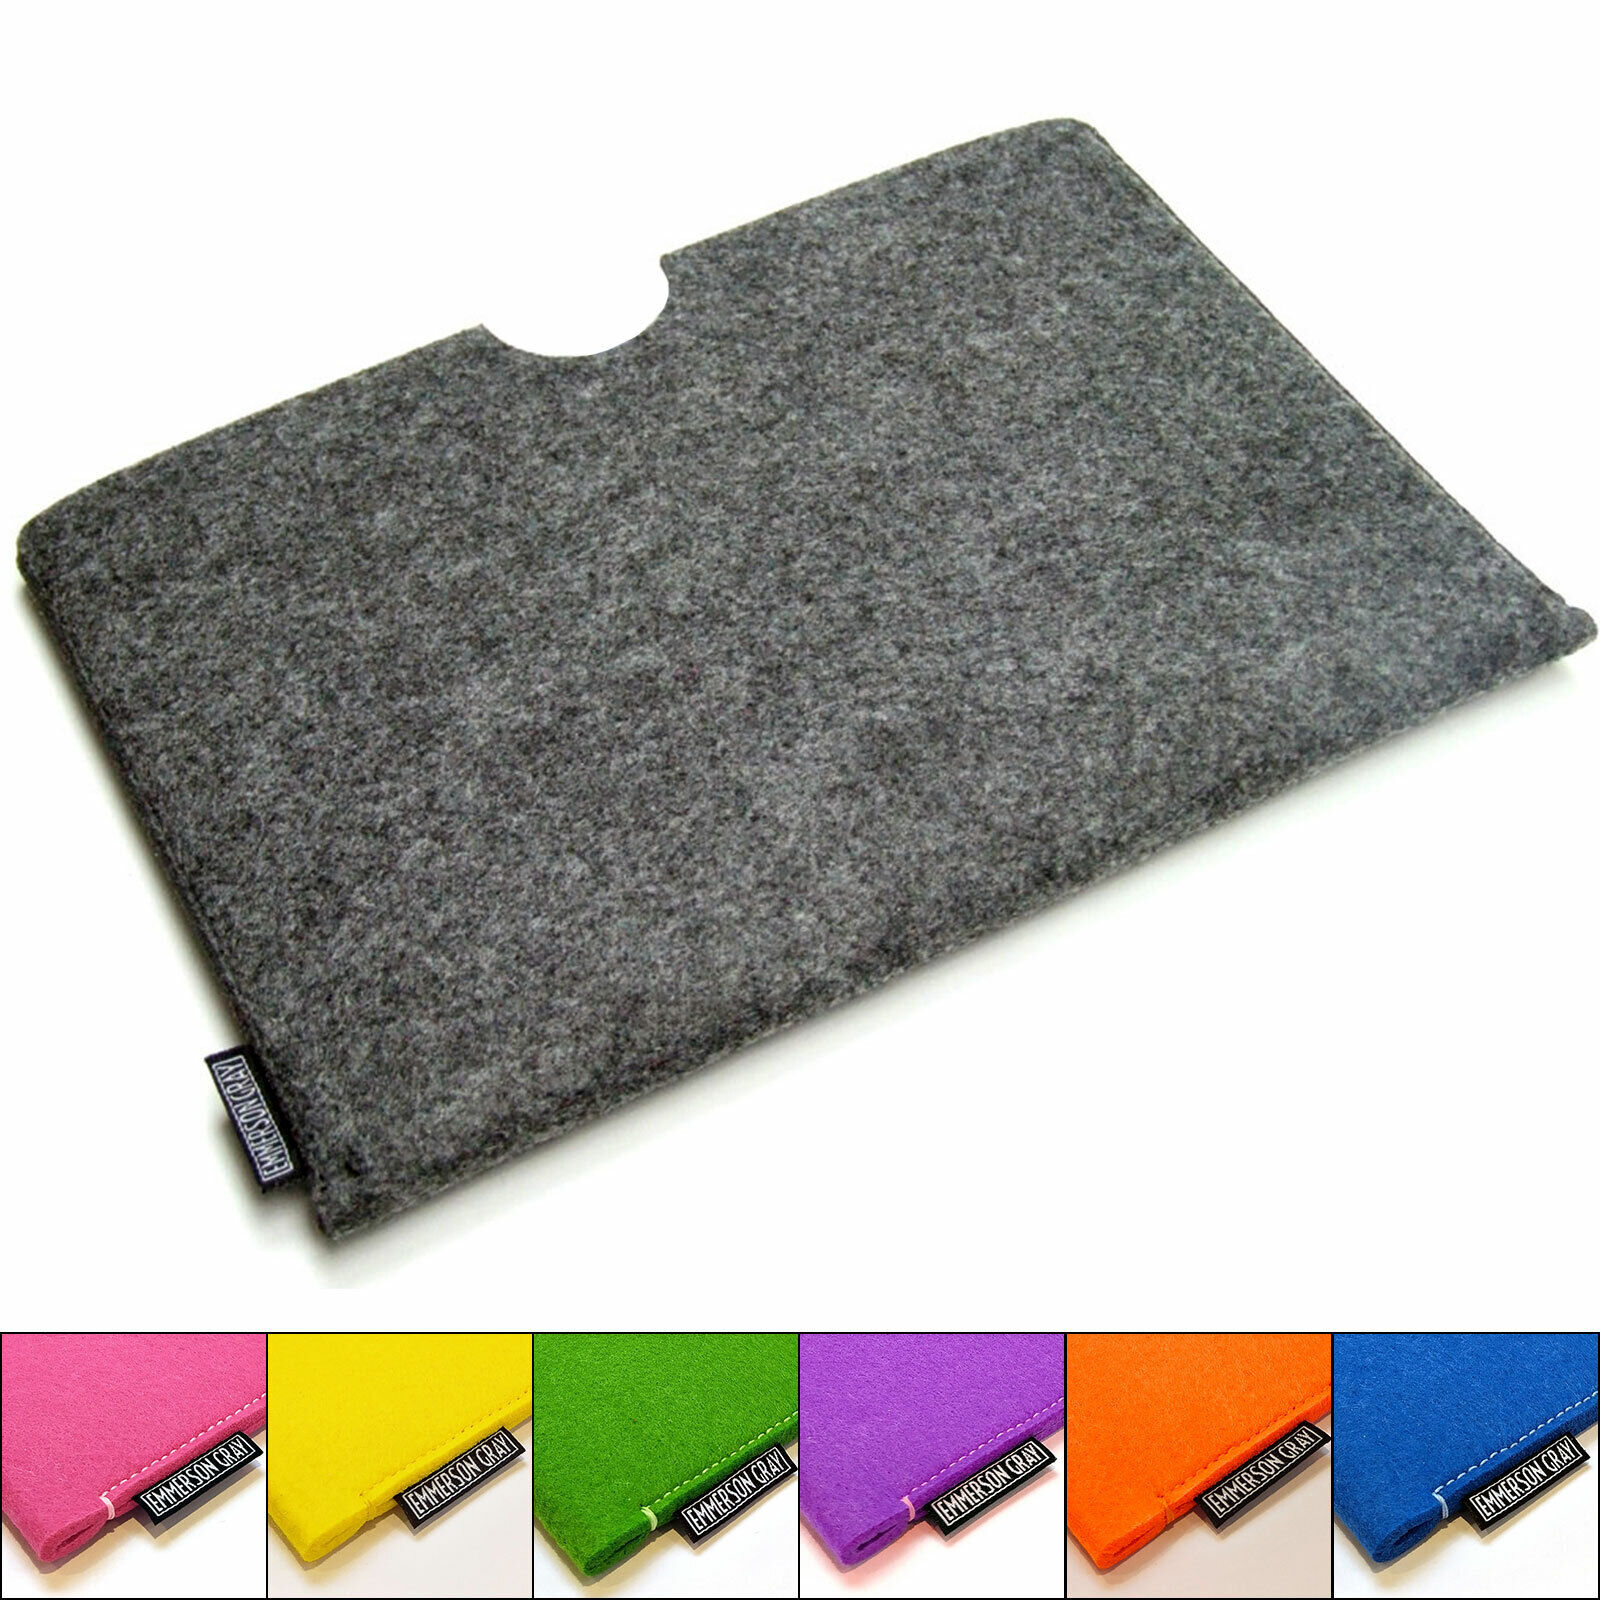 Felt sleeve compatible with DELL XPS 13 - UK MADE, PERFECT FIT